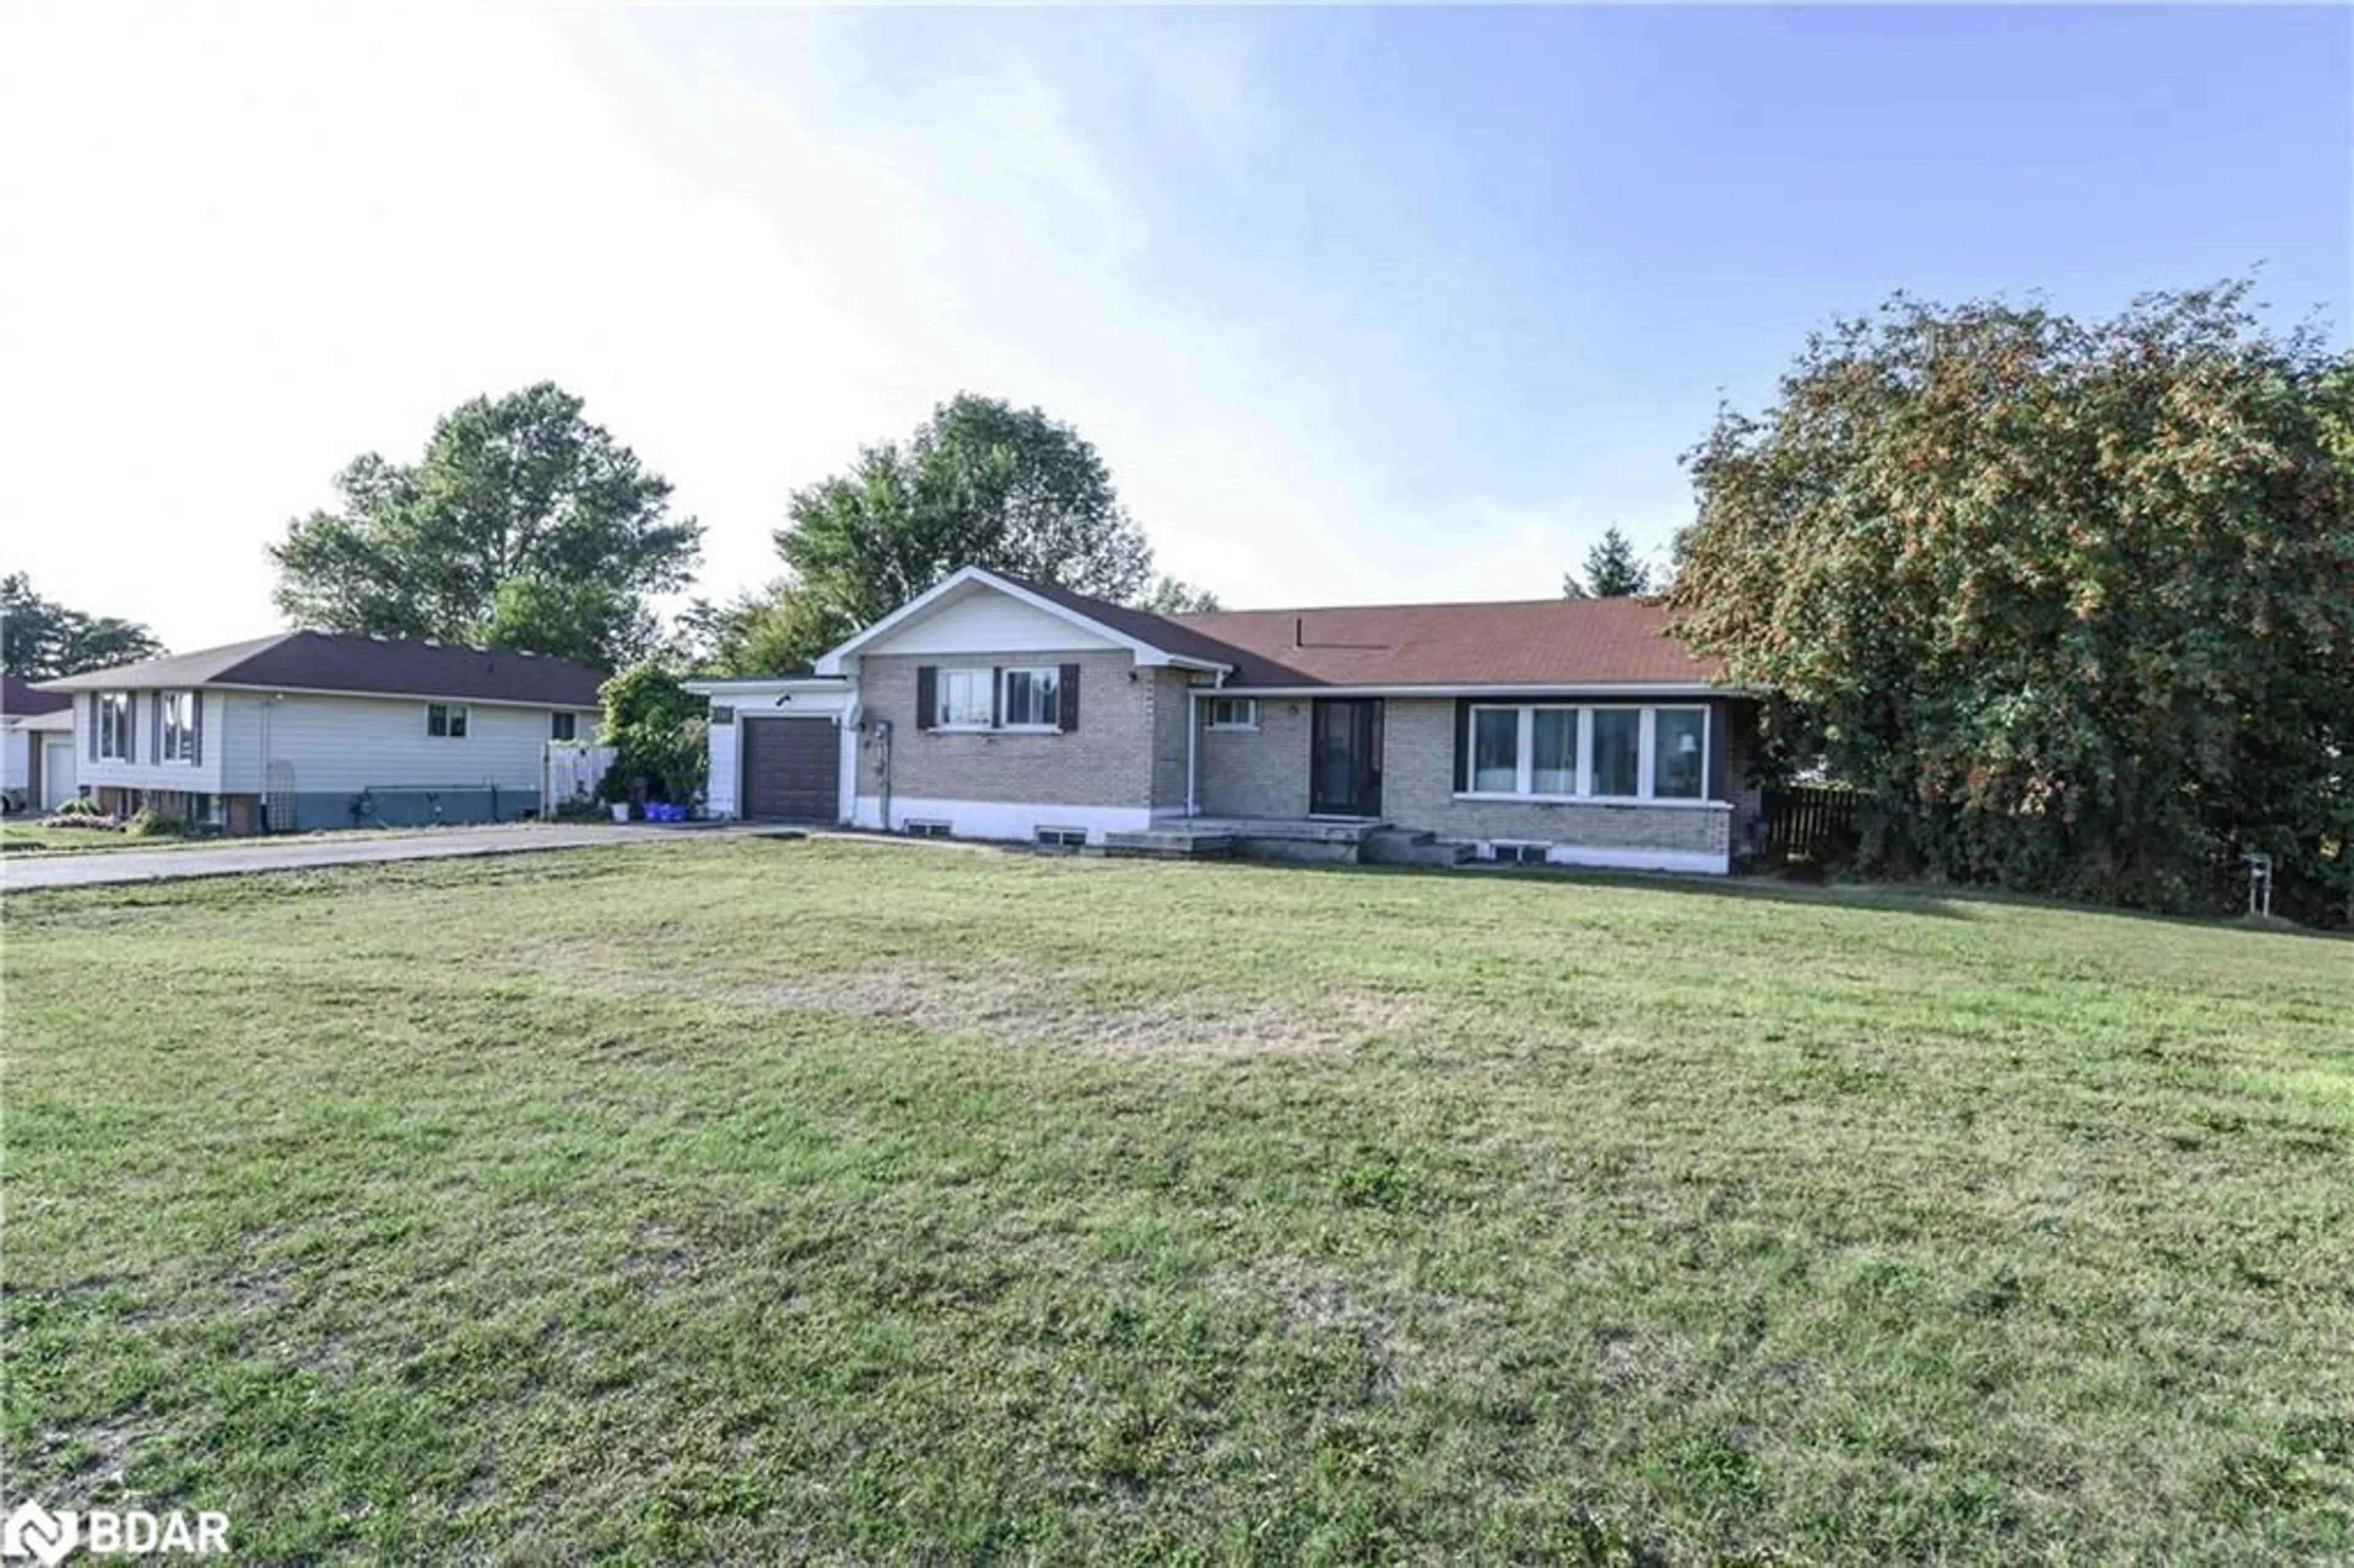 Frontside or backside of a home for 2146 Innisfil Beach Rd, Innisfil Ontario L9S 4B9